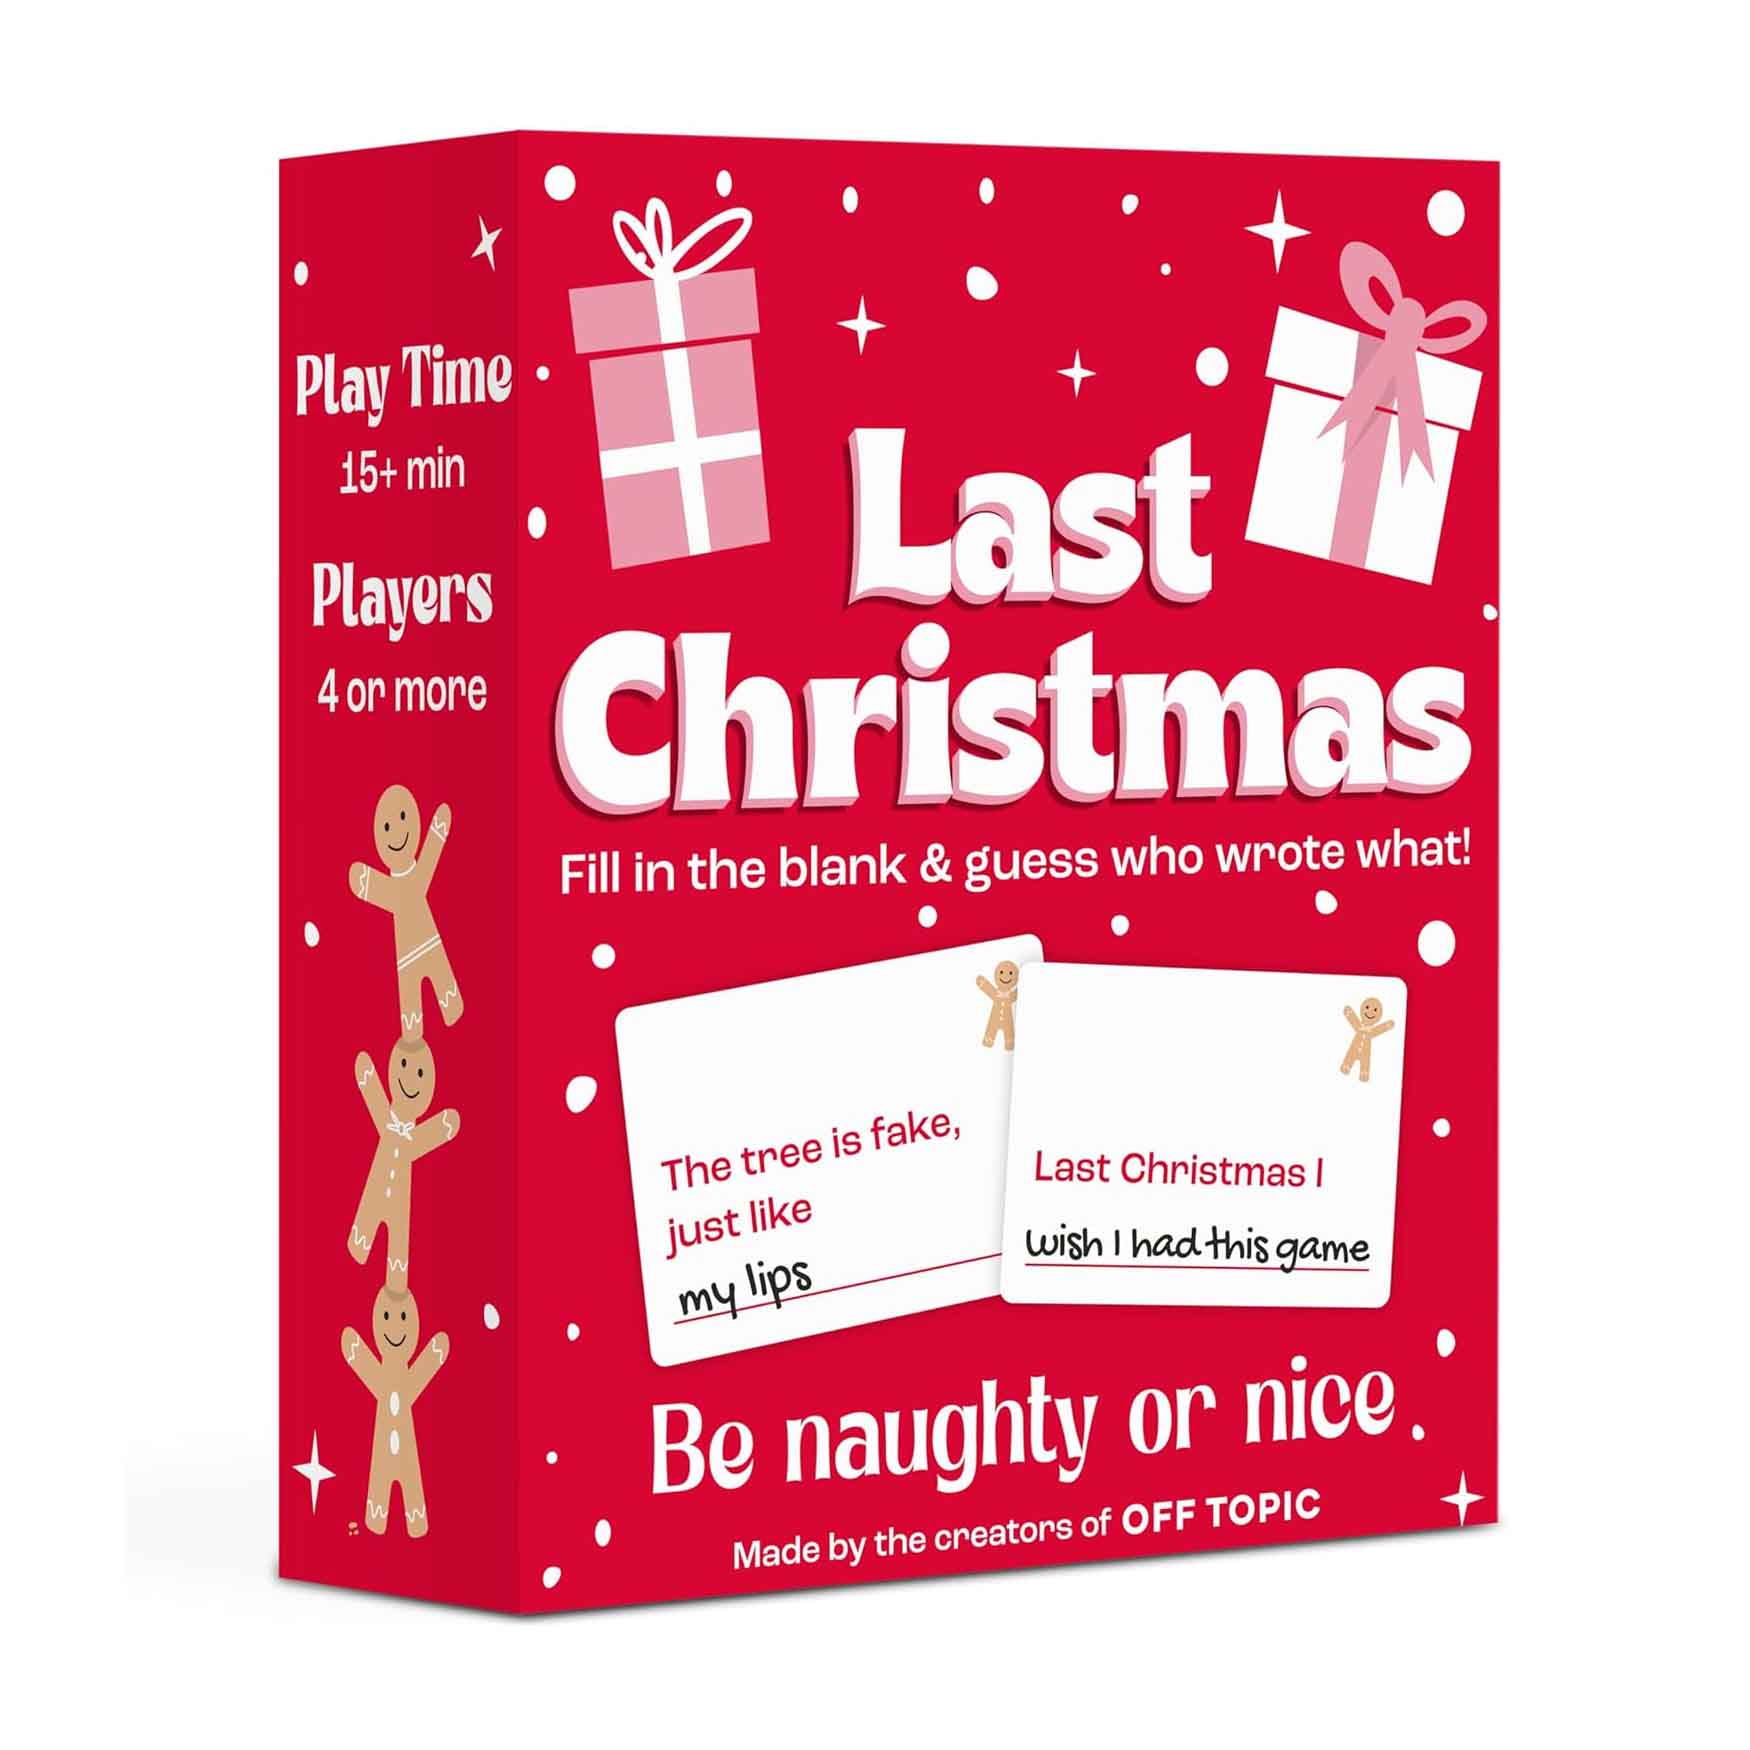 Last Christmas: The Naughty or Nice Holiday Party Game in a red box